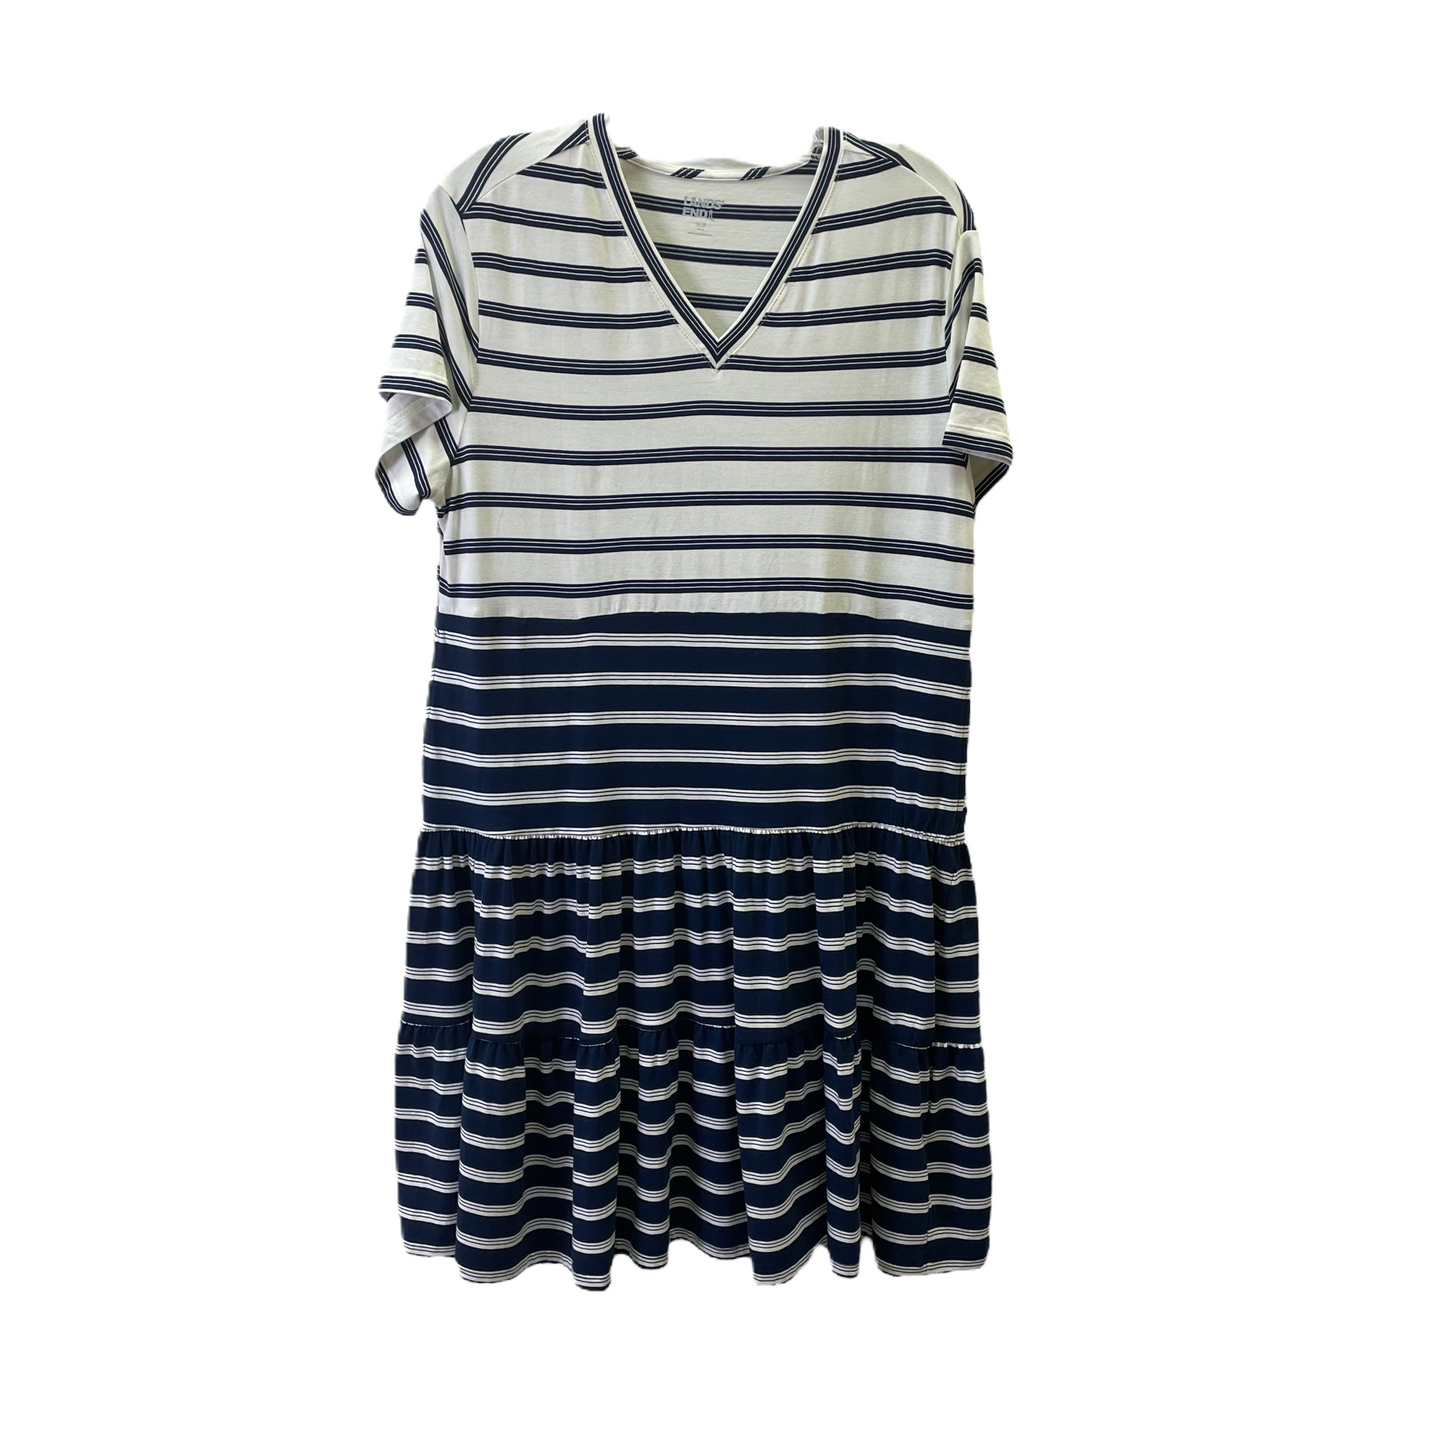 White Dress Casual Short By Lands End, Size: M